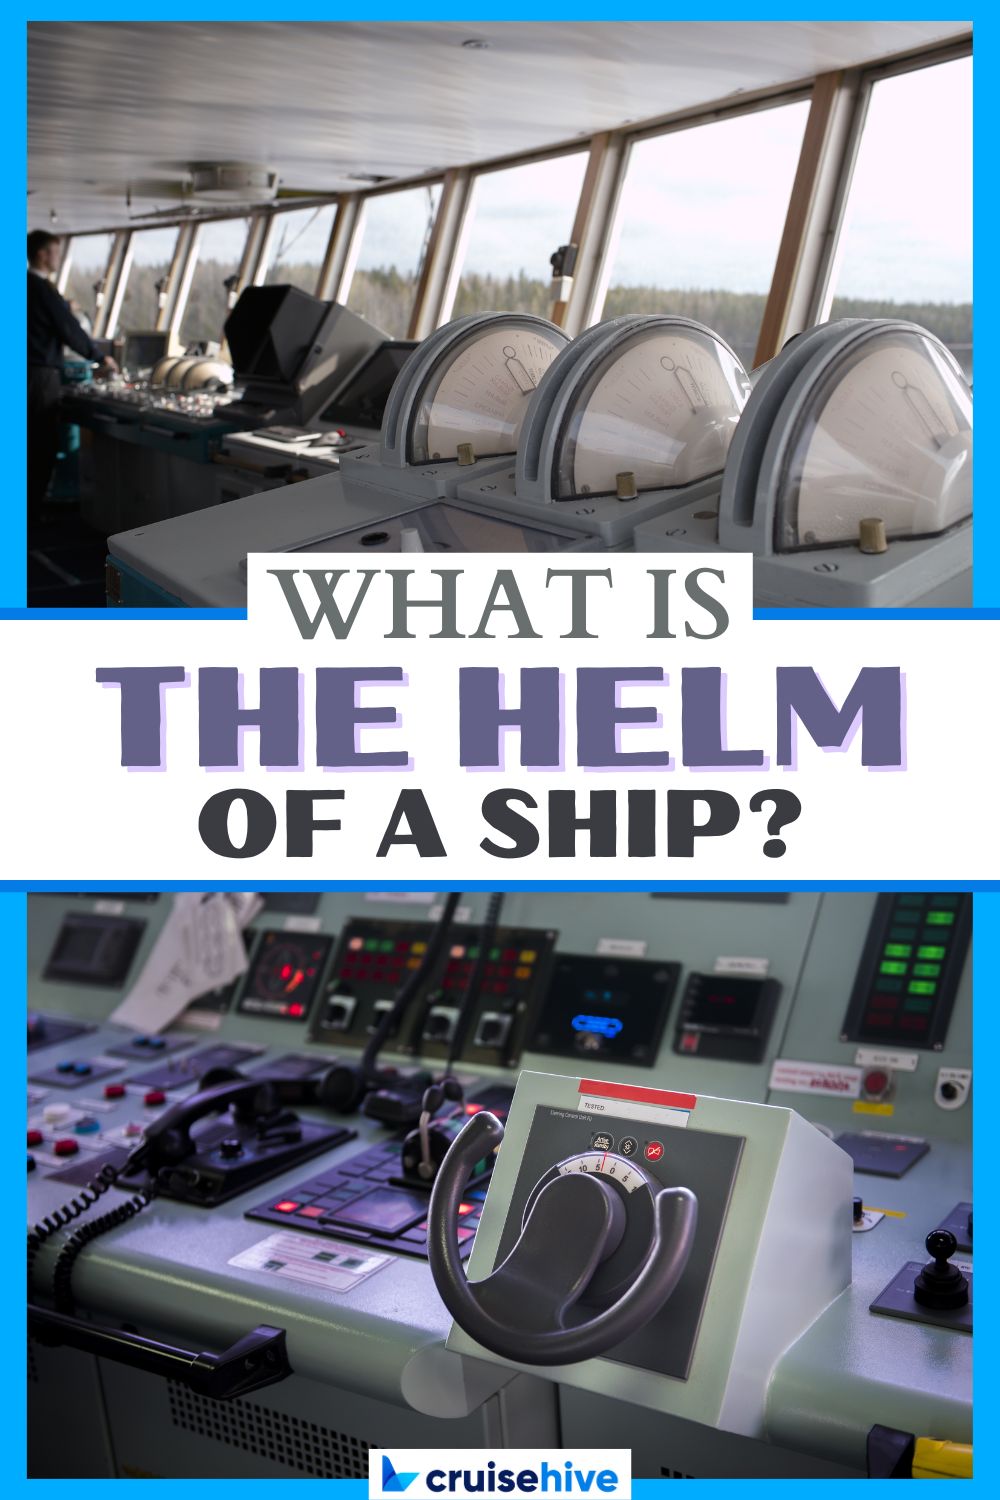 What Is the Helm of a Ship